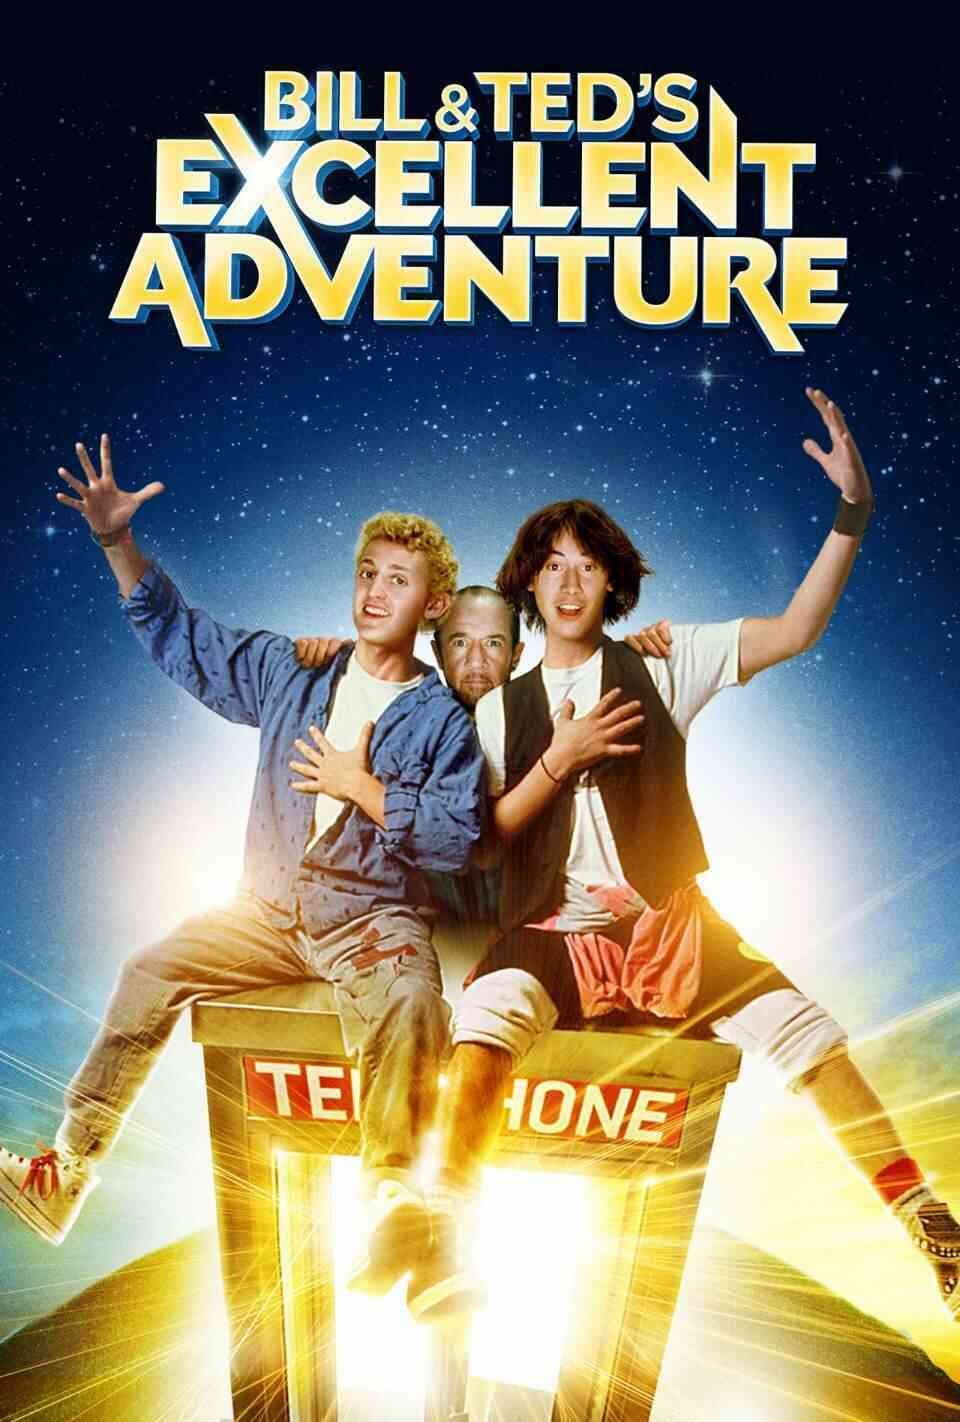 Read Bill & Ted's Excellent Adventure screenplay.